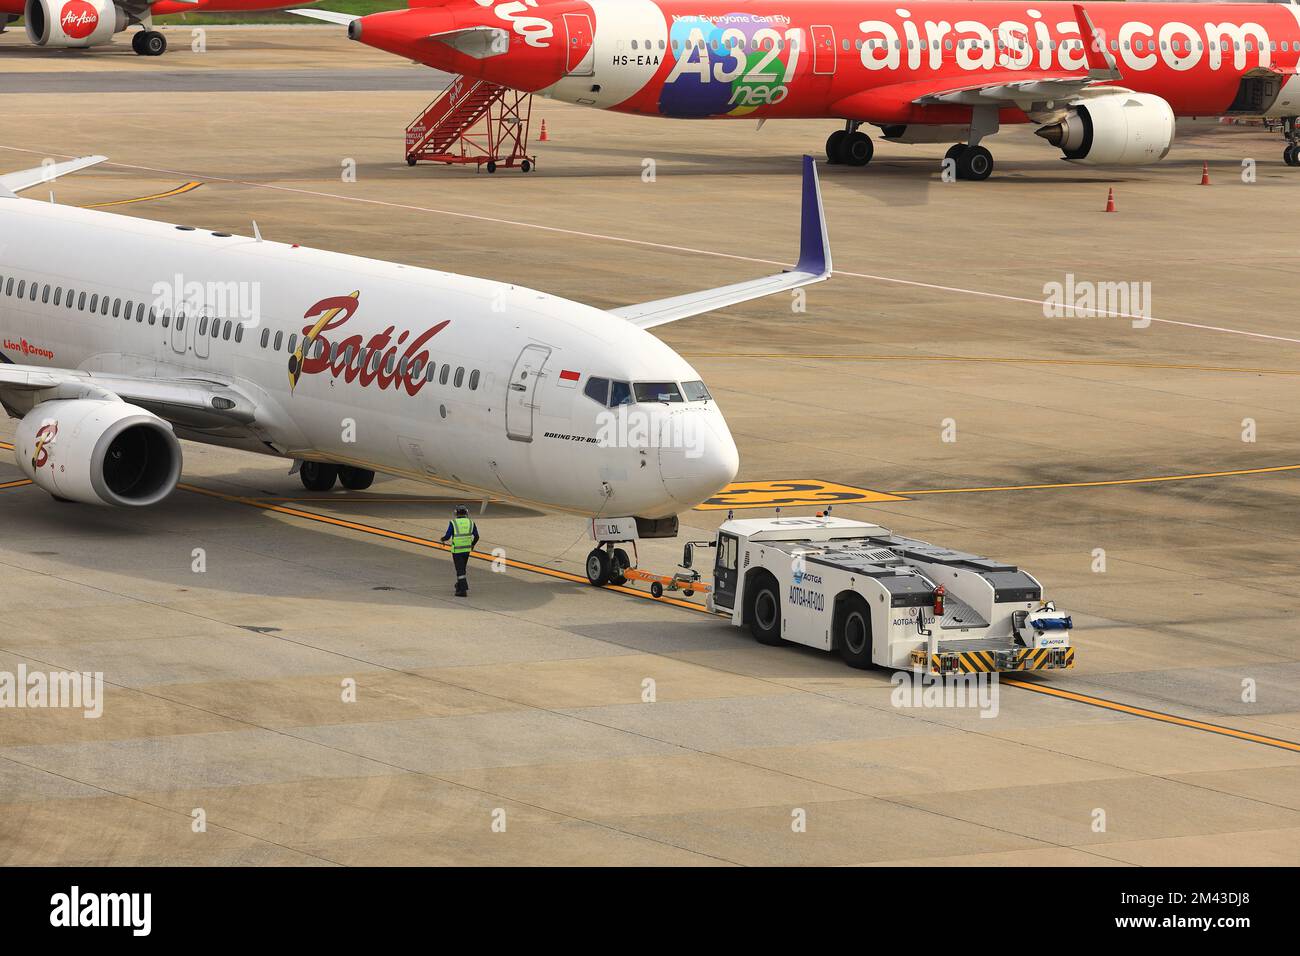 Airplane Tugs, Machine for push back the aircraft to taxiway, one in ground handling services Stock Photo